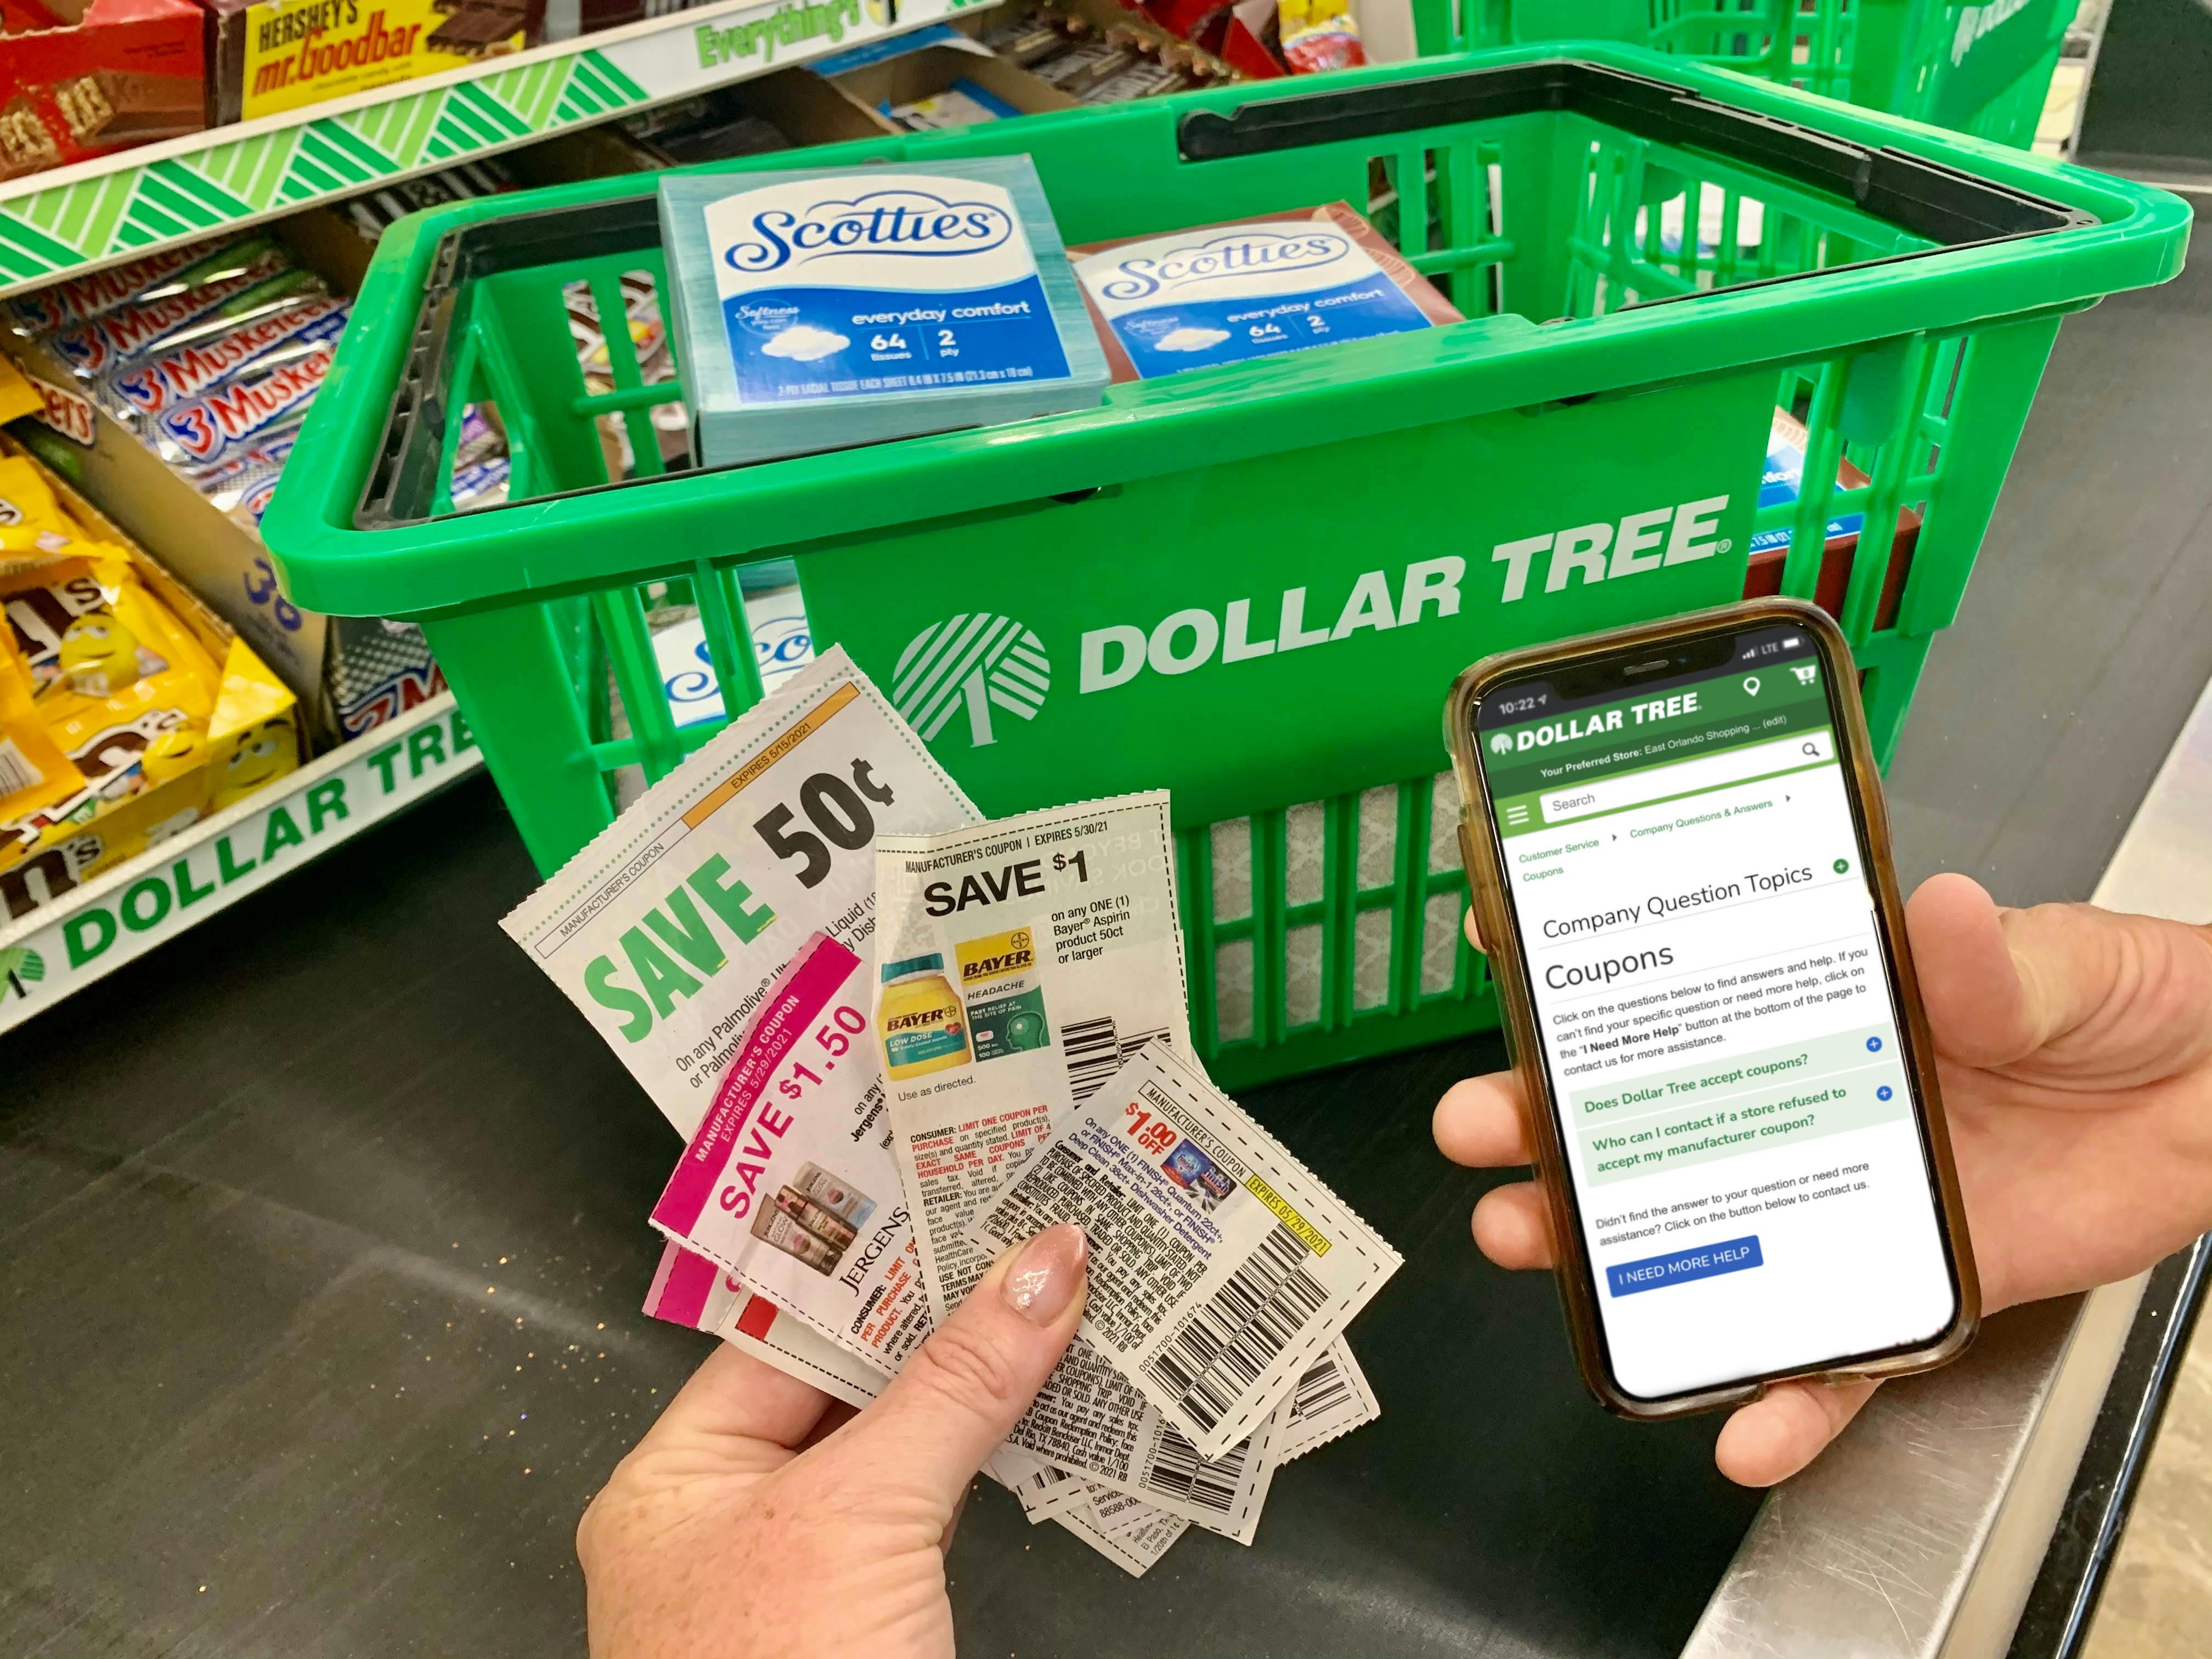 holding coupons and phone with dollar tree shopping basket